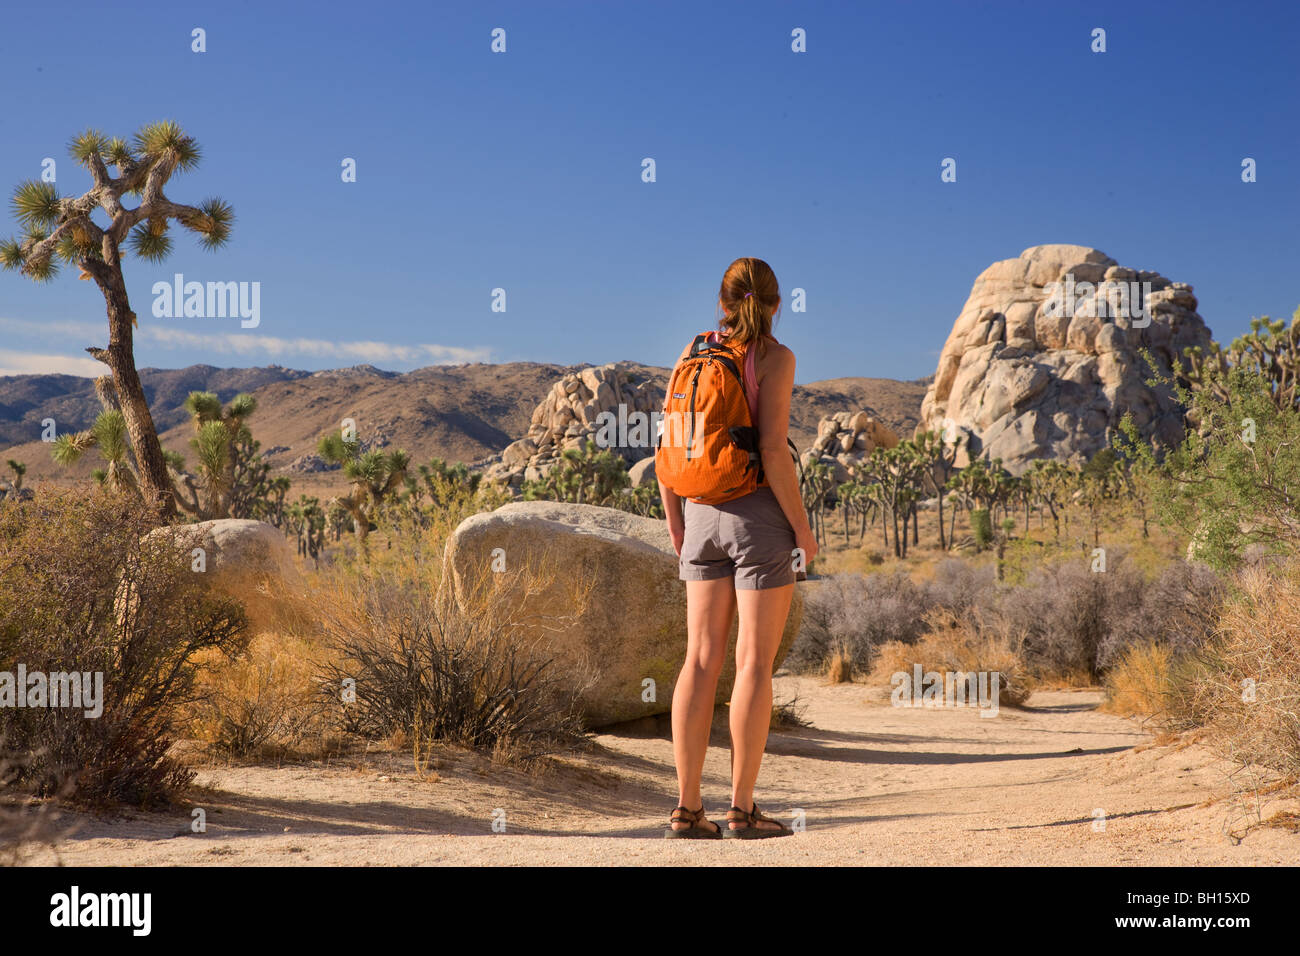 A hiker in Joshua Tree National Park, California. (Model released) Stock Photo